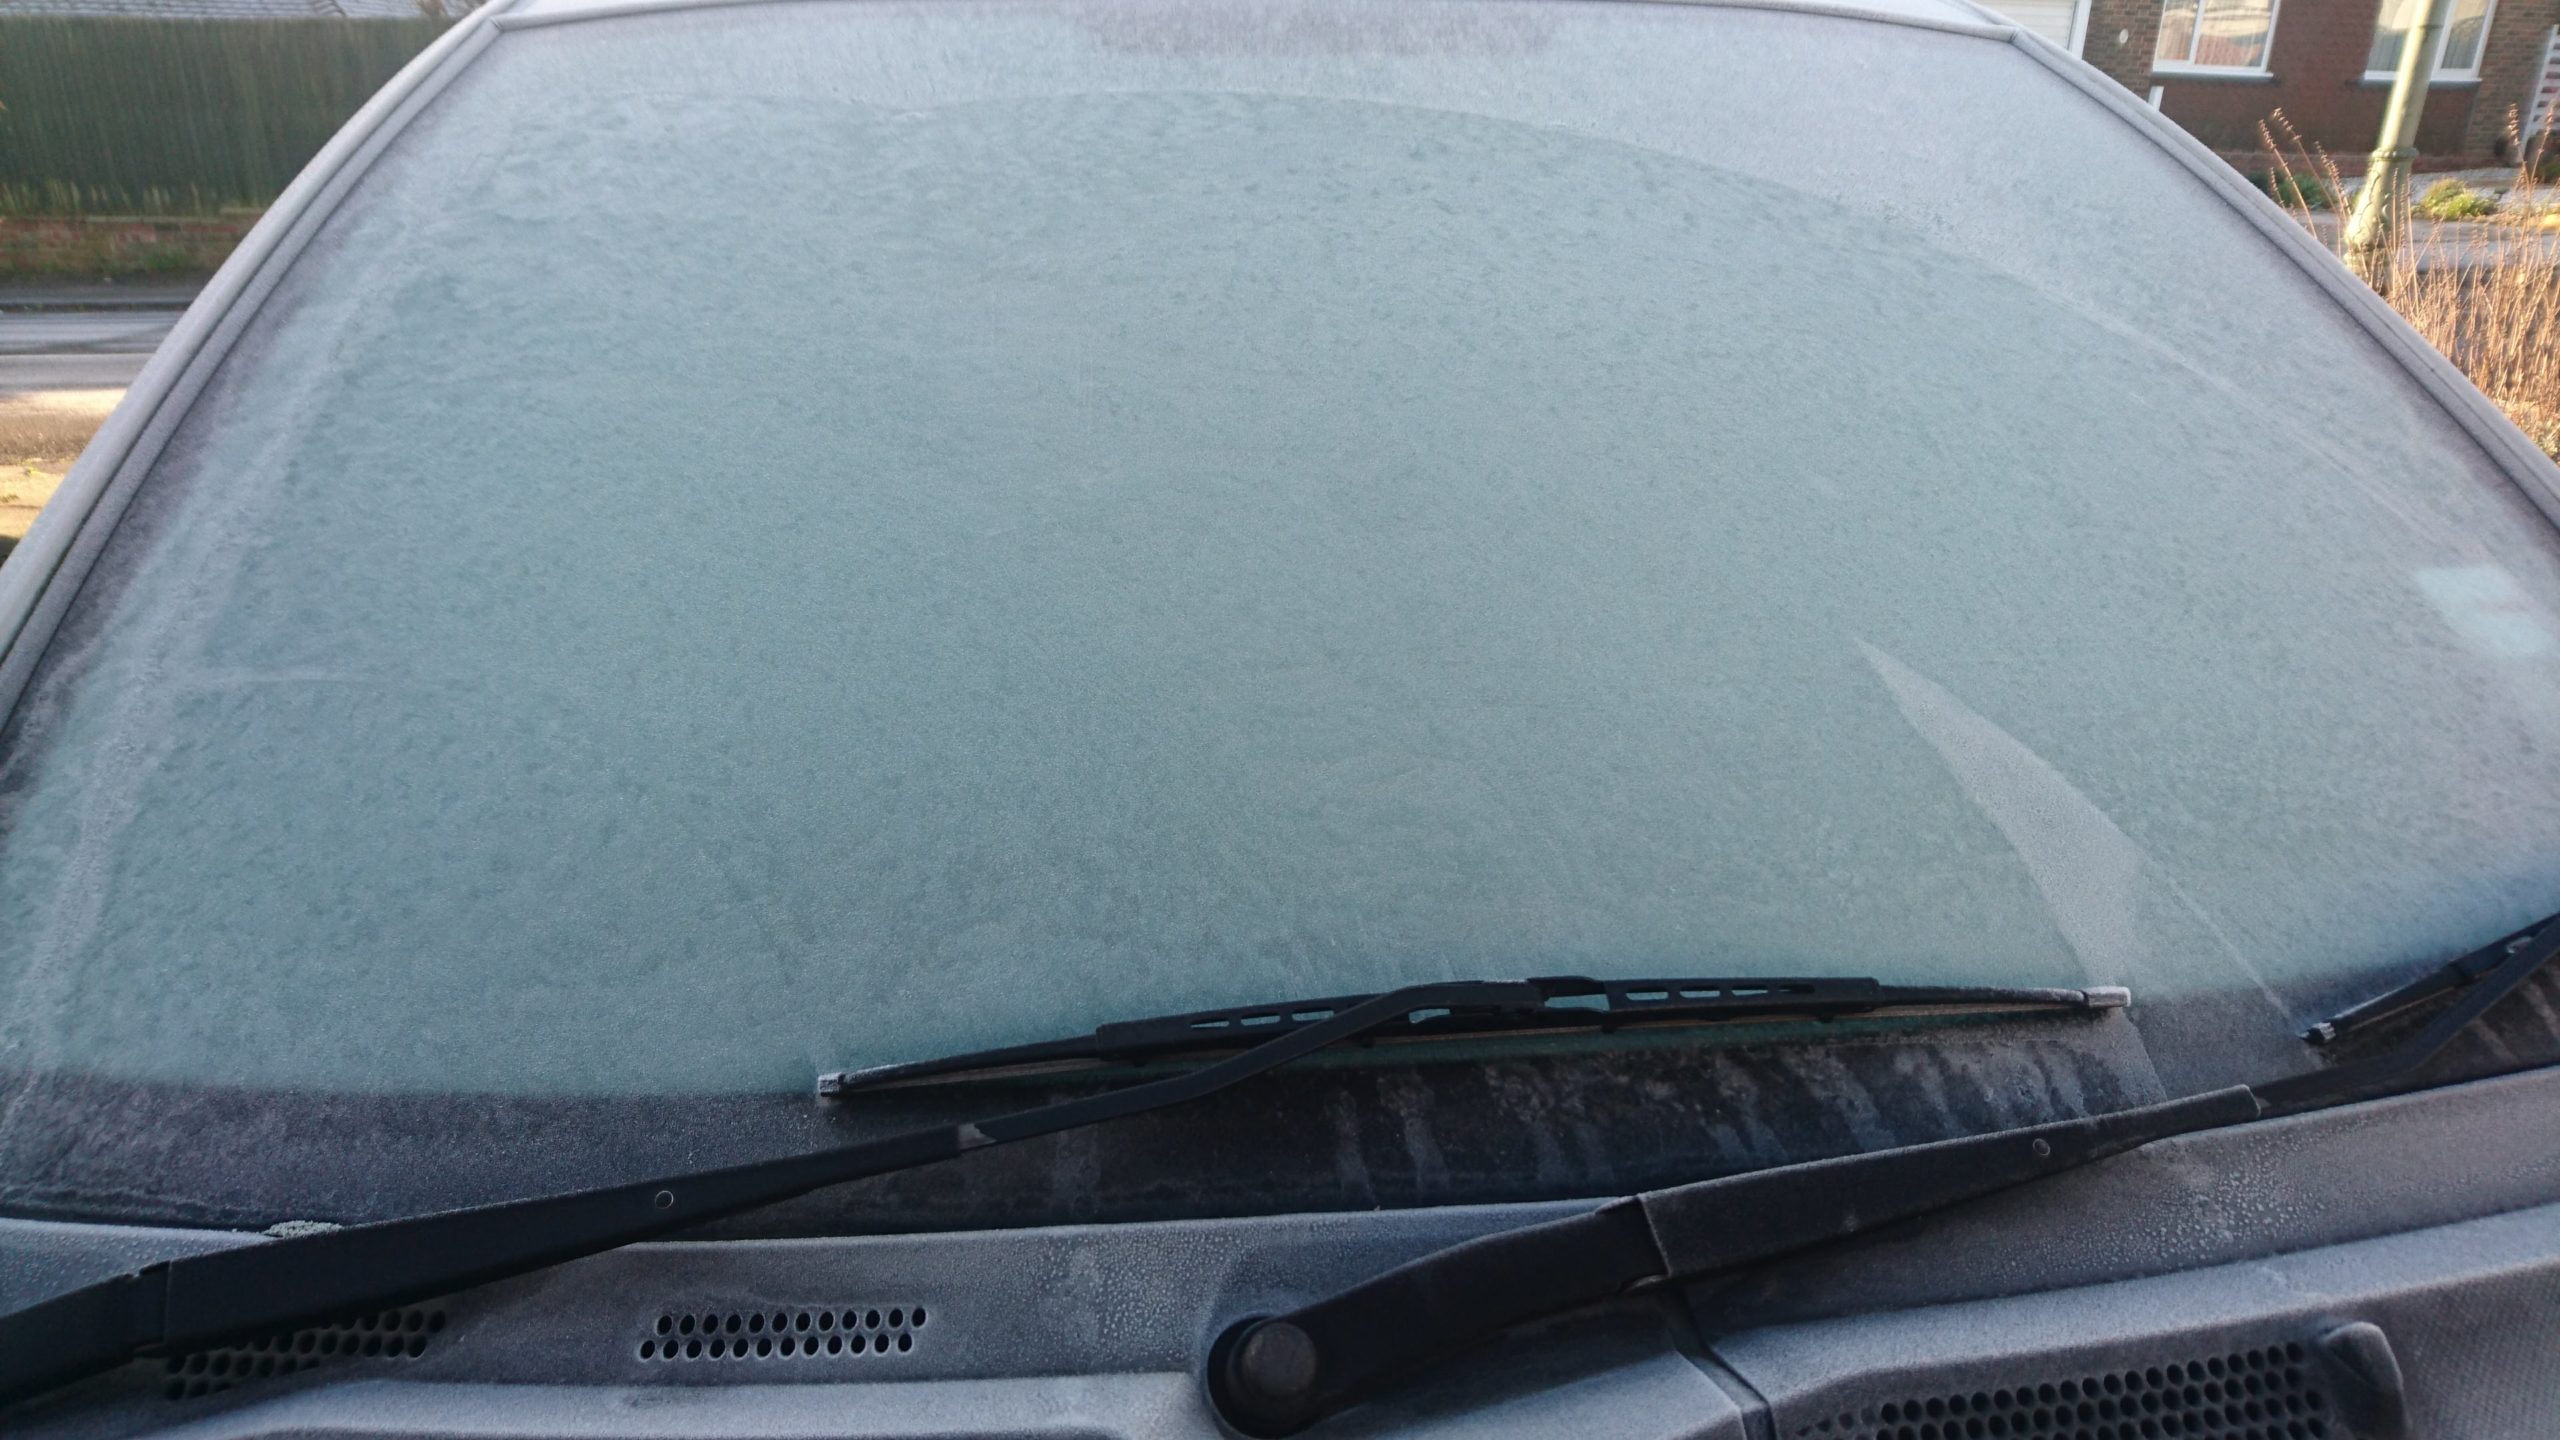 How to defrost your car windscreen without idling your engine! *Ad*